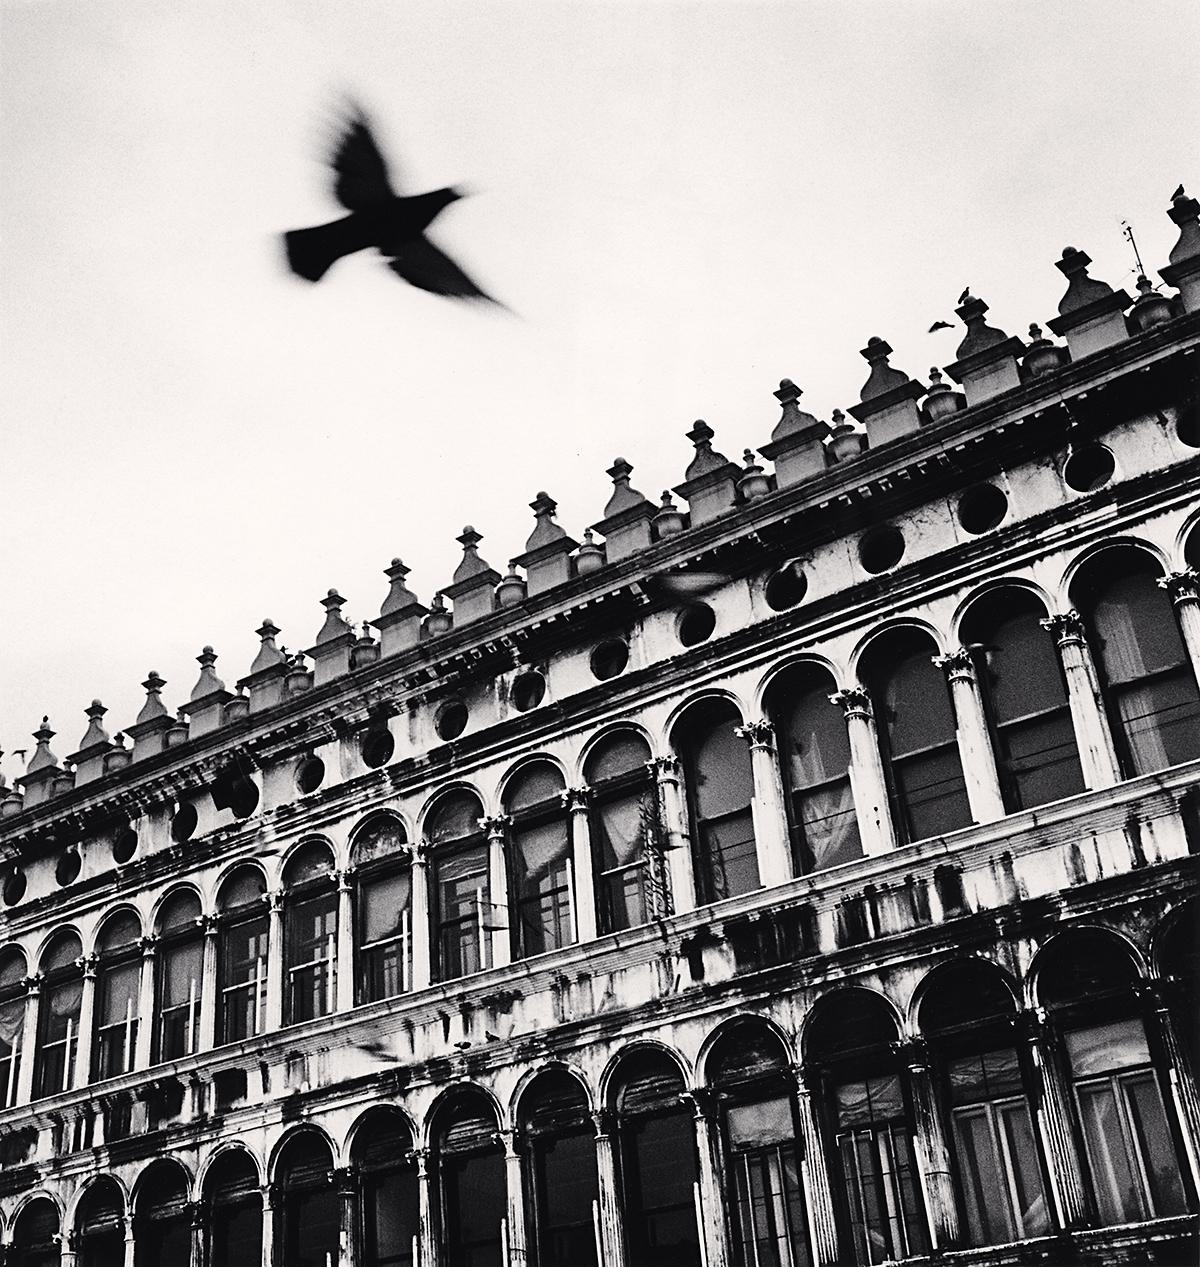 Michael Kenna Black and White Photograph - Flying Bird over San Marco, Venice, Italy